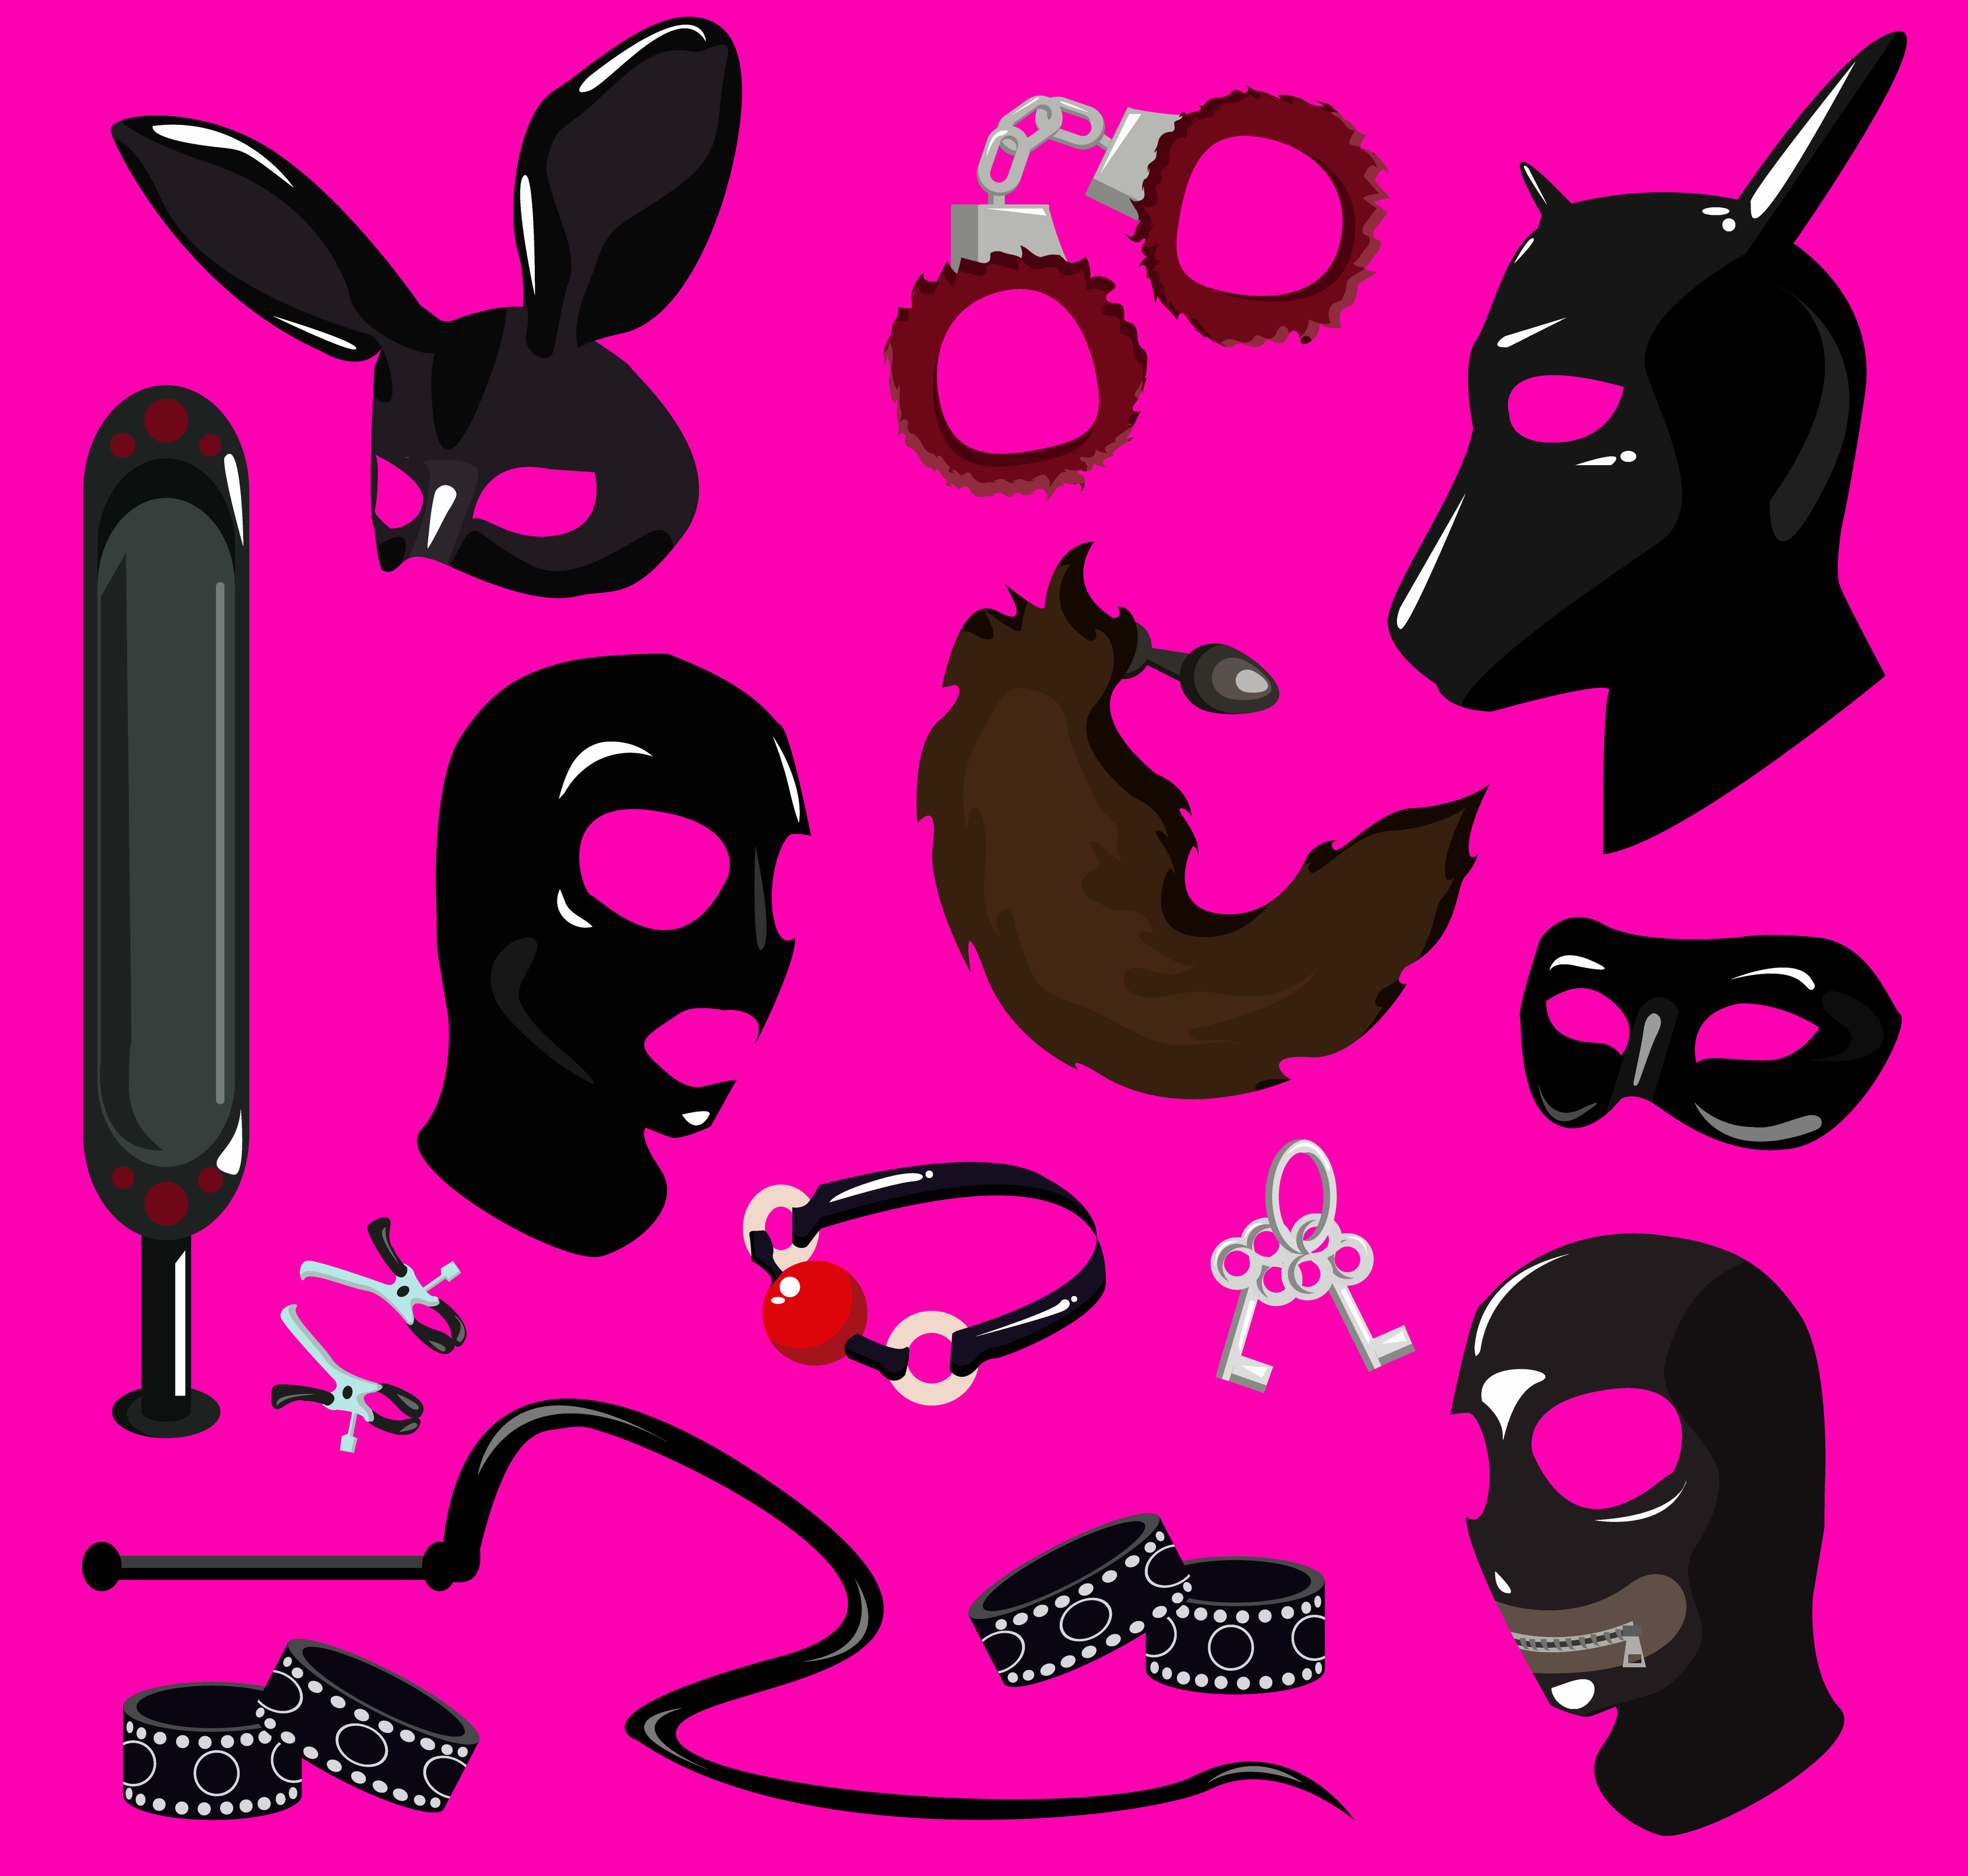 Ideal queer sex toys to spice up your sex life. Vibrators, anal balls, handcuffs, latex mask, stitch gag.